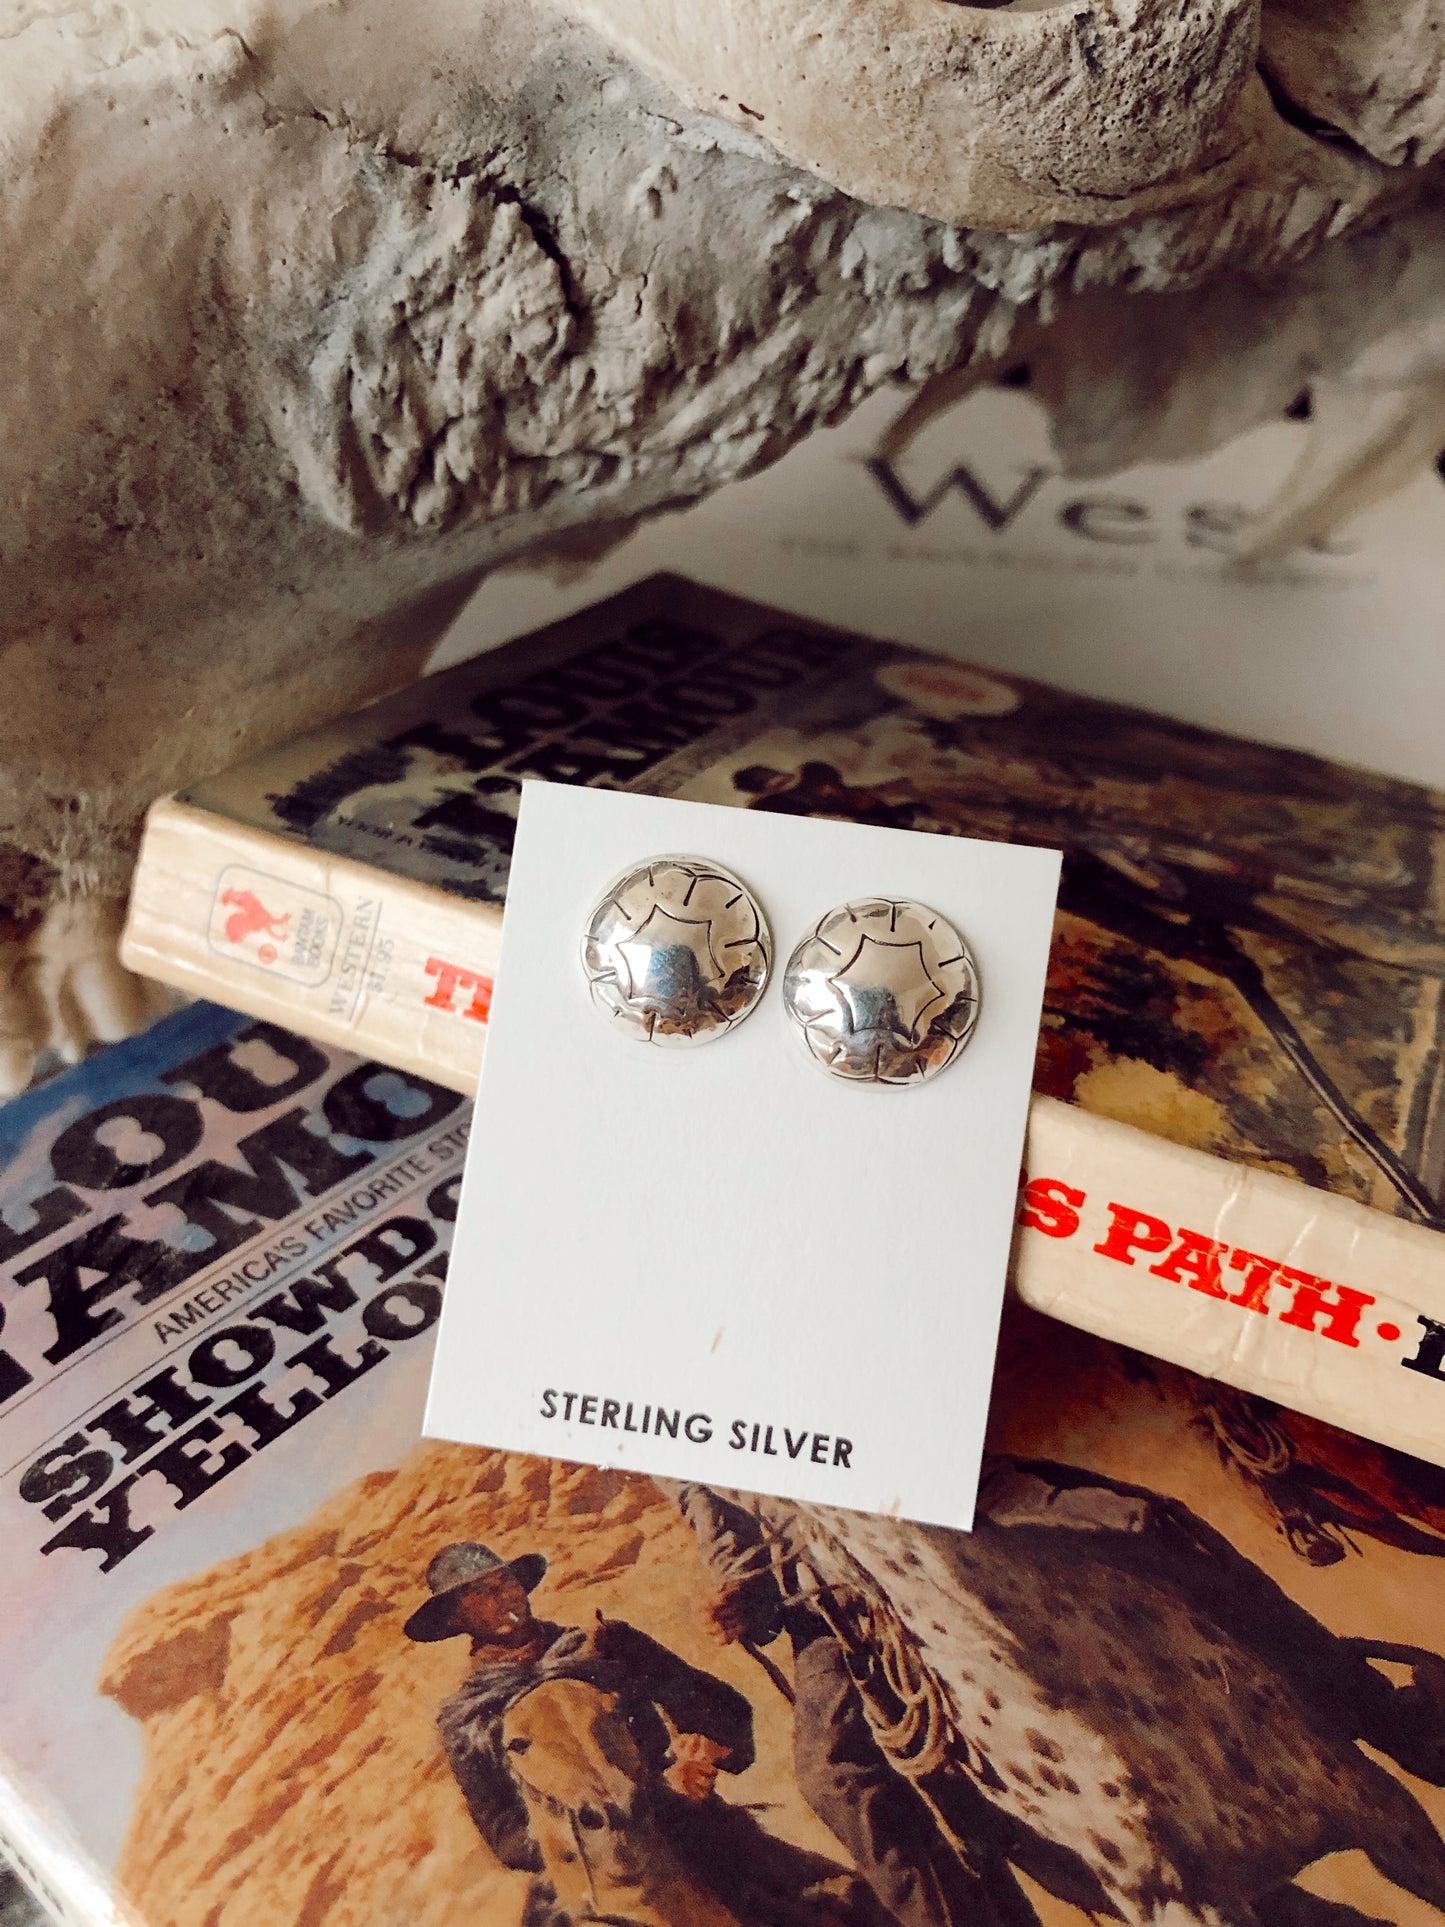 The Stamped Sterling Studs